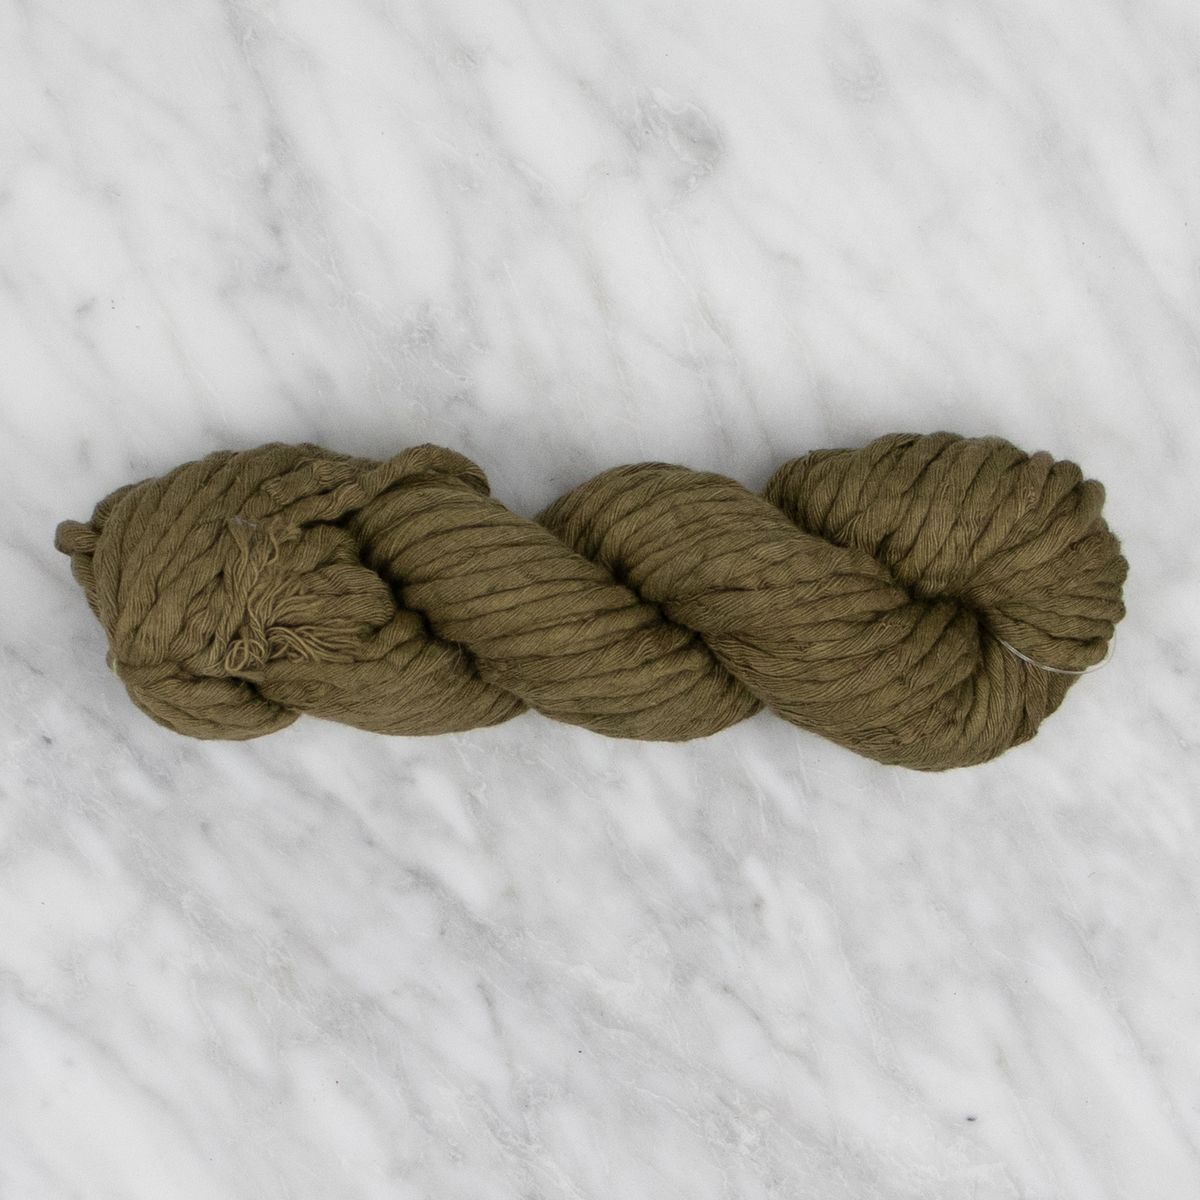 5mm Hand-Dyed Cotton String - Hunter - 100 grams